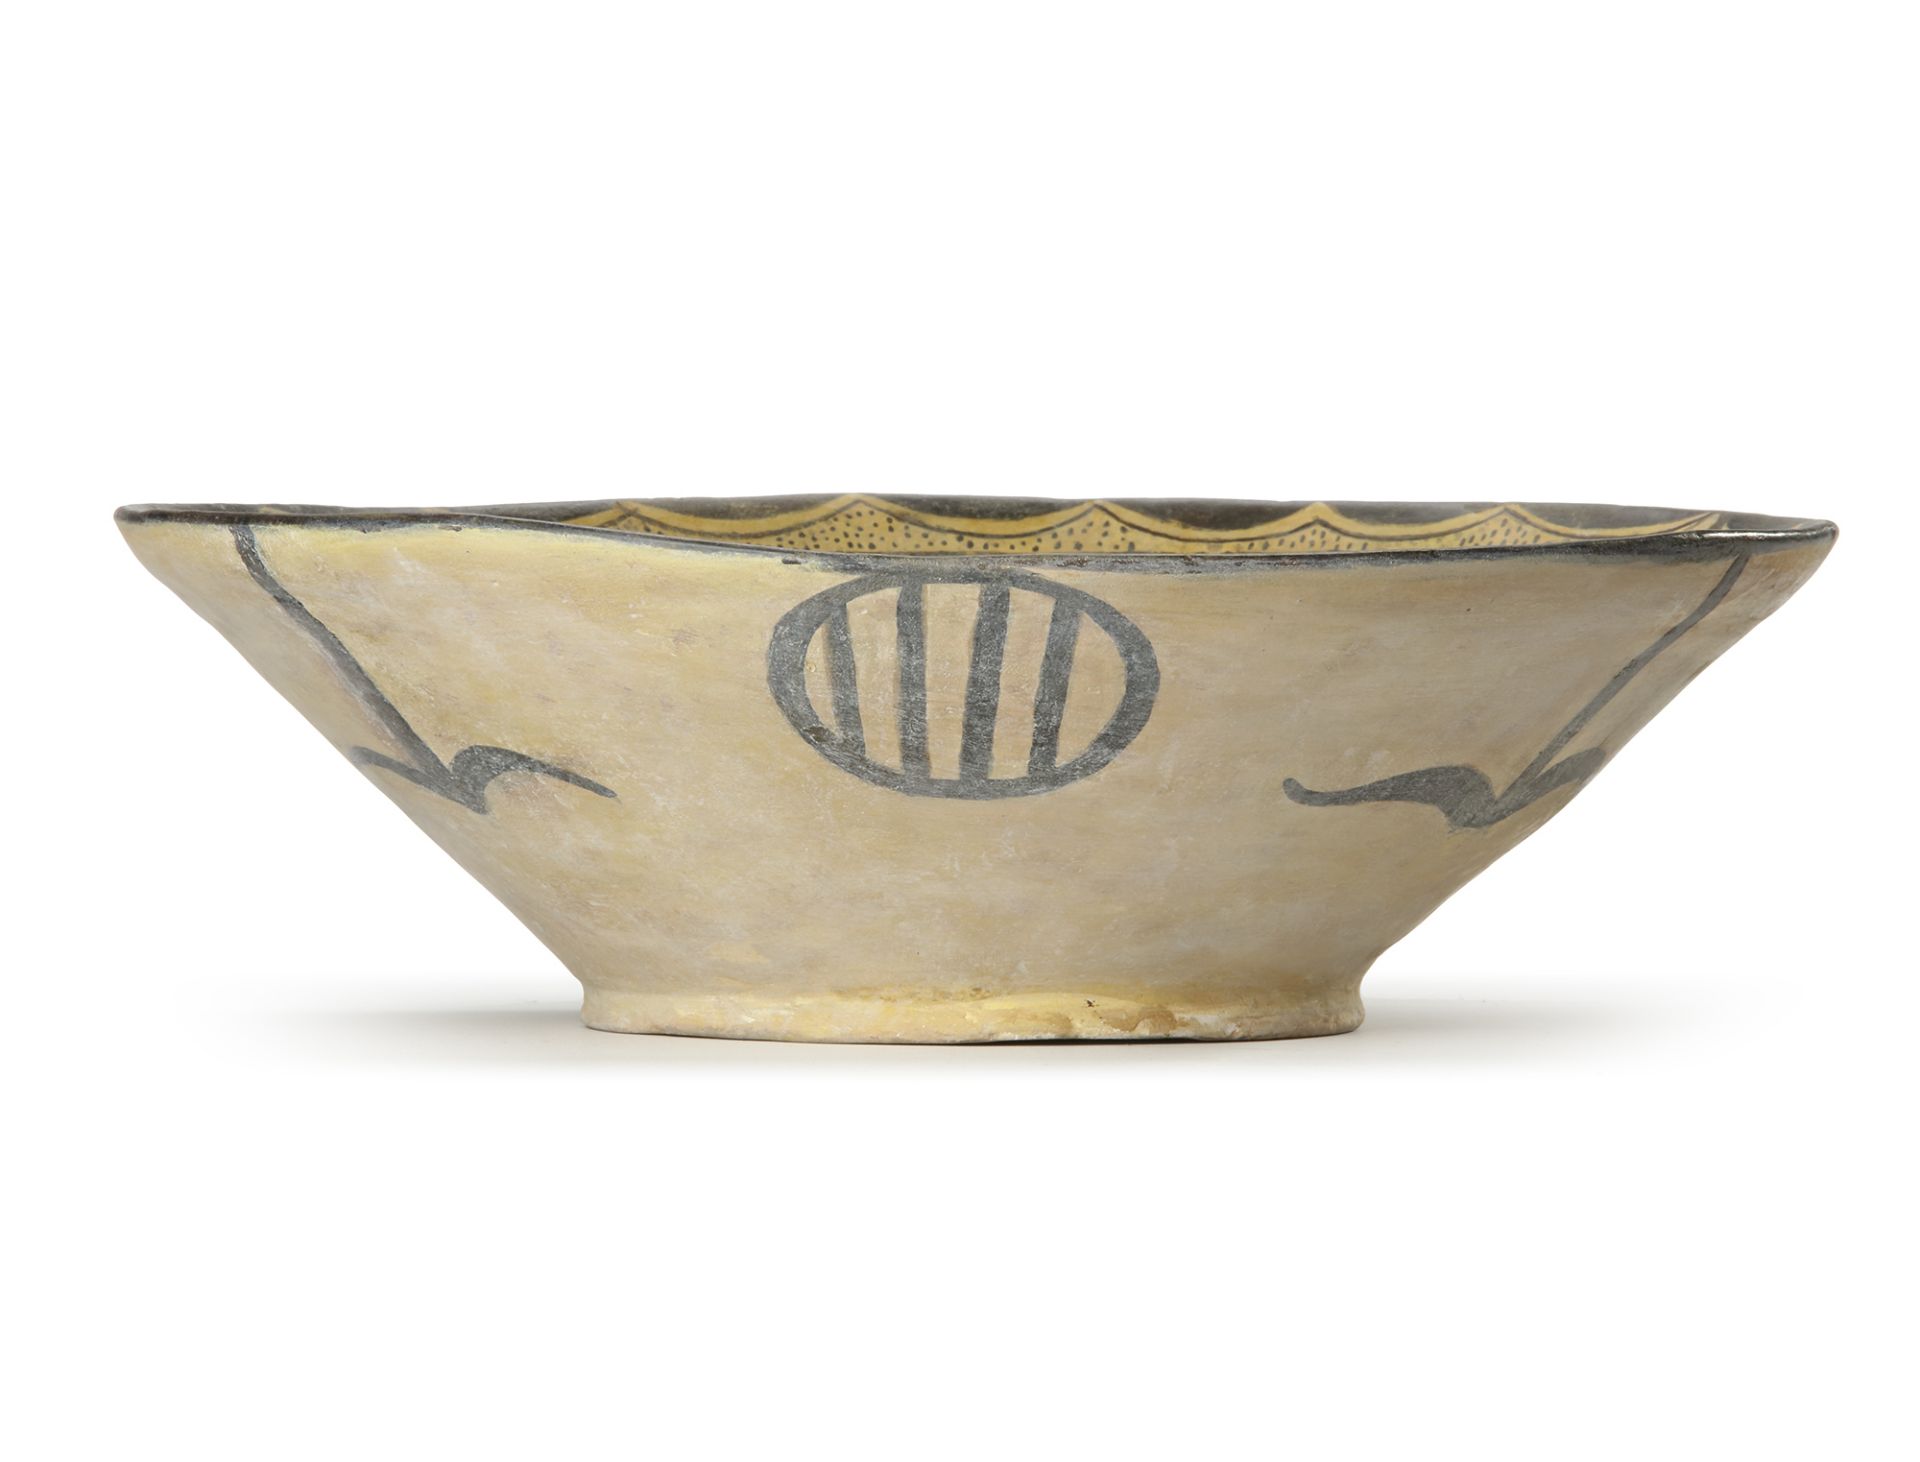 A NISHAPUR POTTERY BOWL, EASTERN PERSIA, 10TH CENTURY - Image 2 of 5